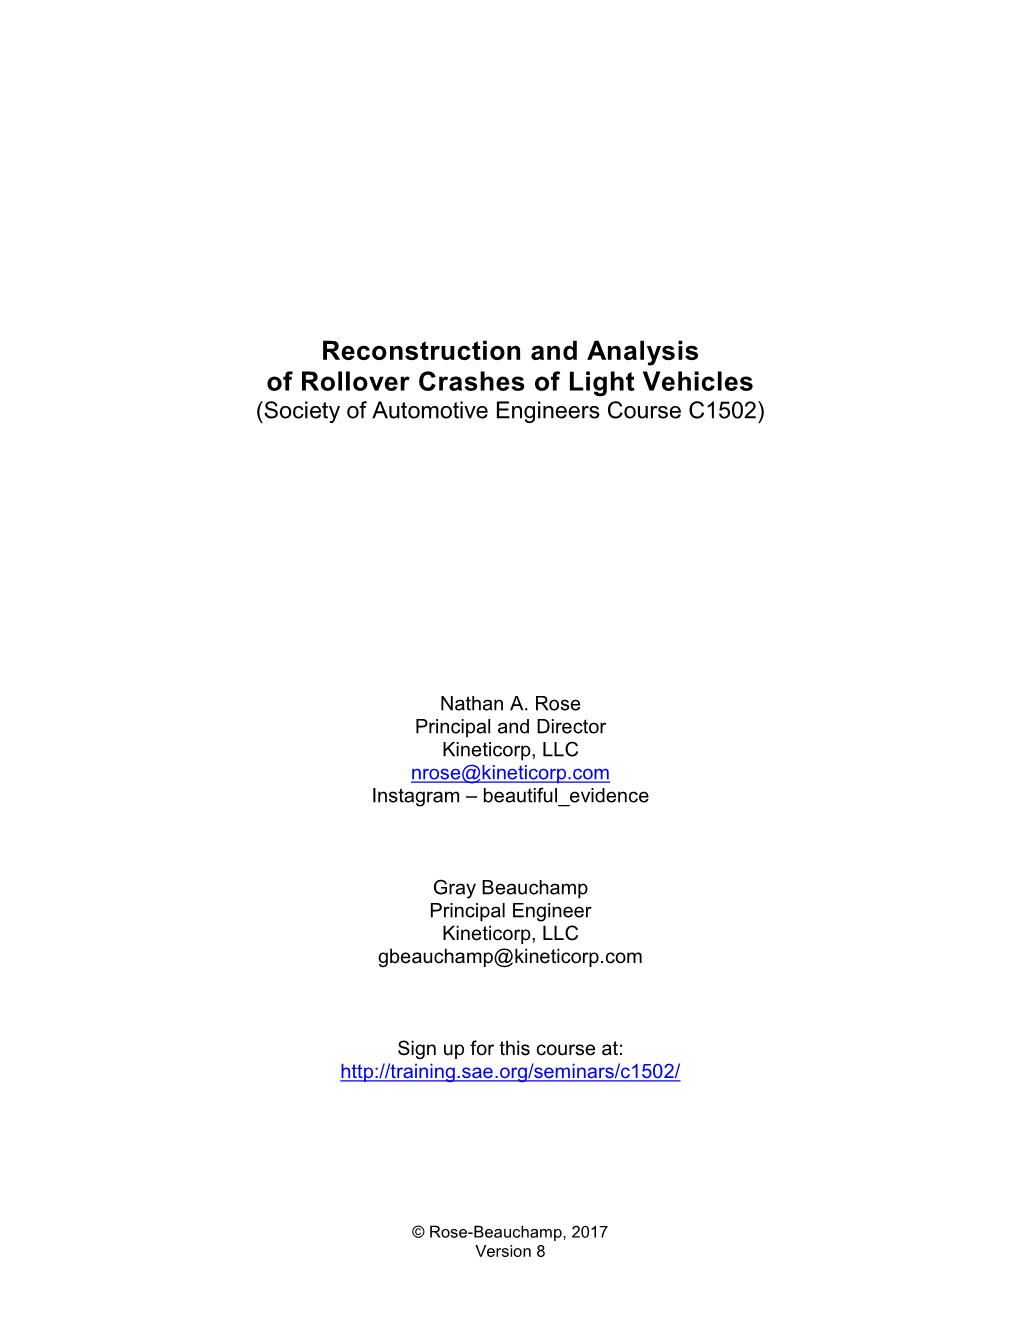 Reconstruction and Analysis of Rollover Crashes of Light Vehicles (Society of Automotive Engineers Course C1502)